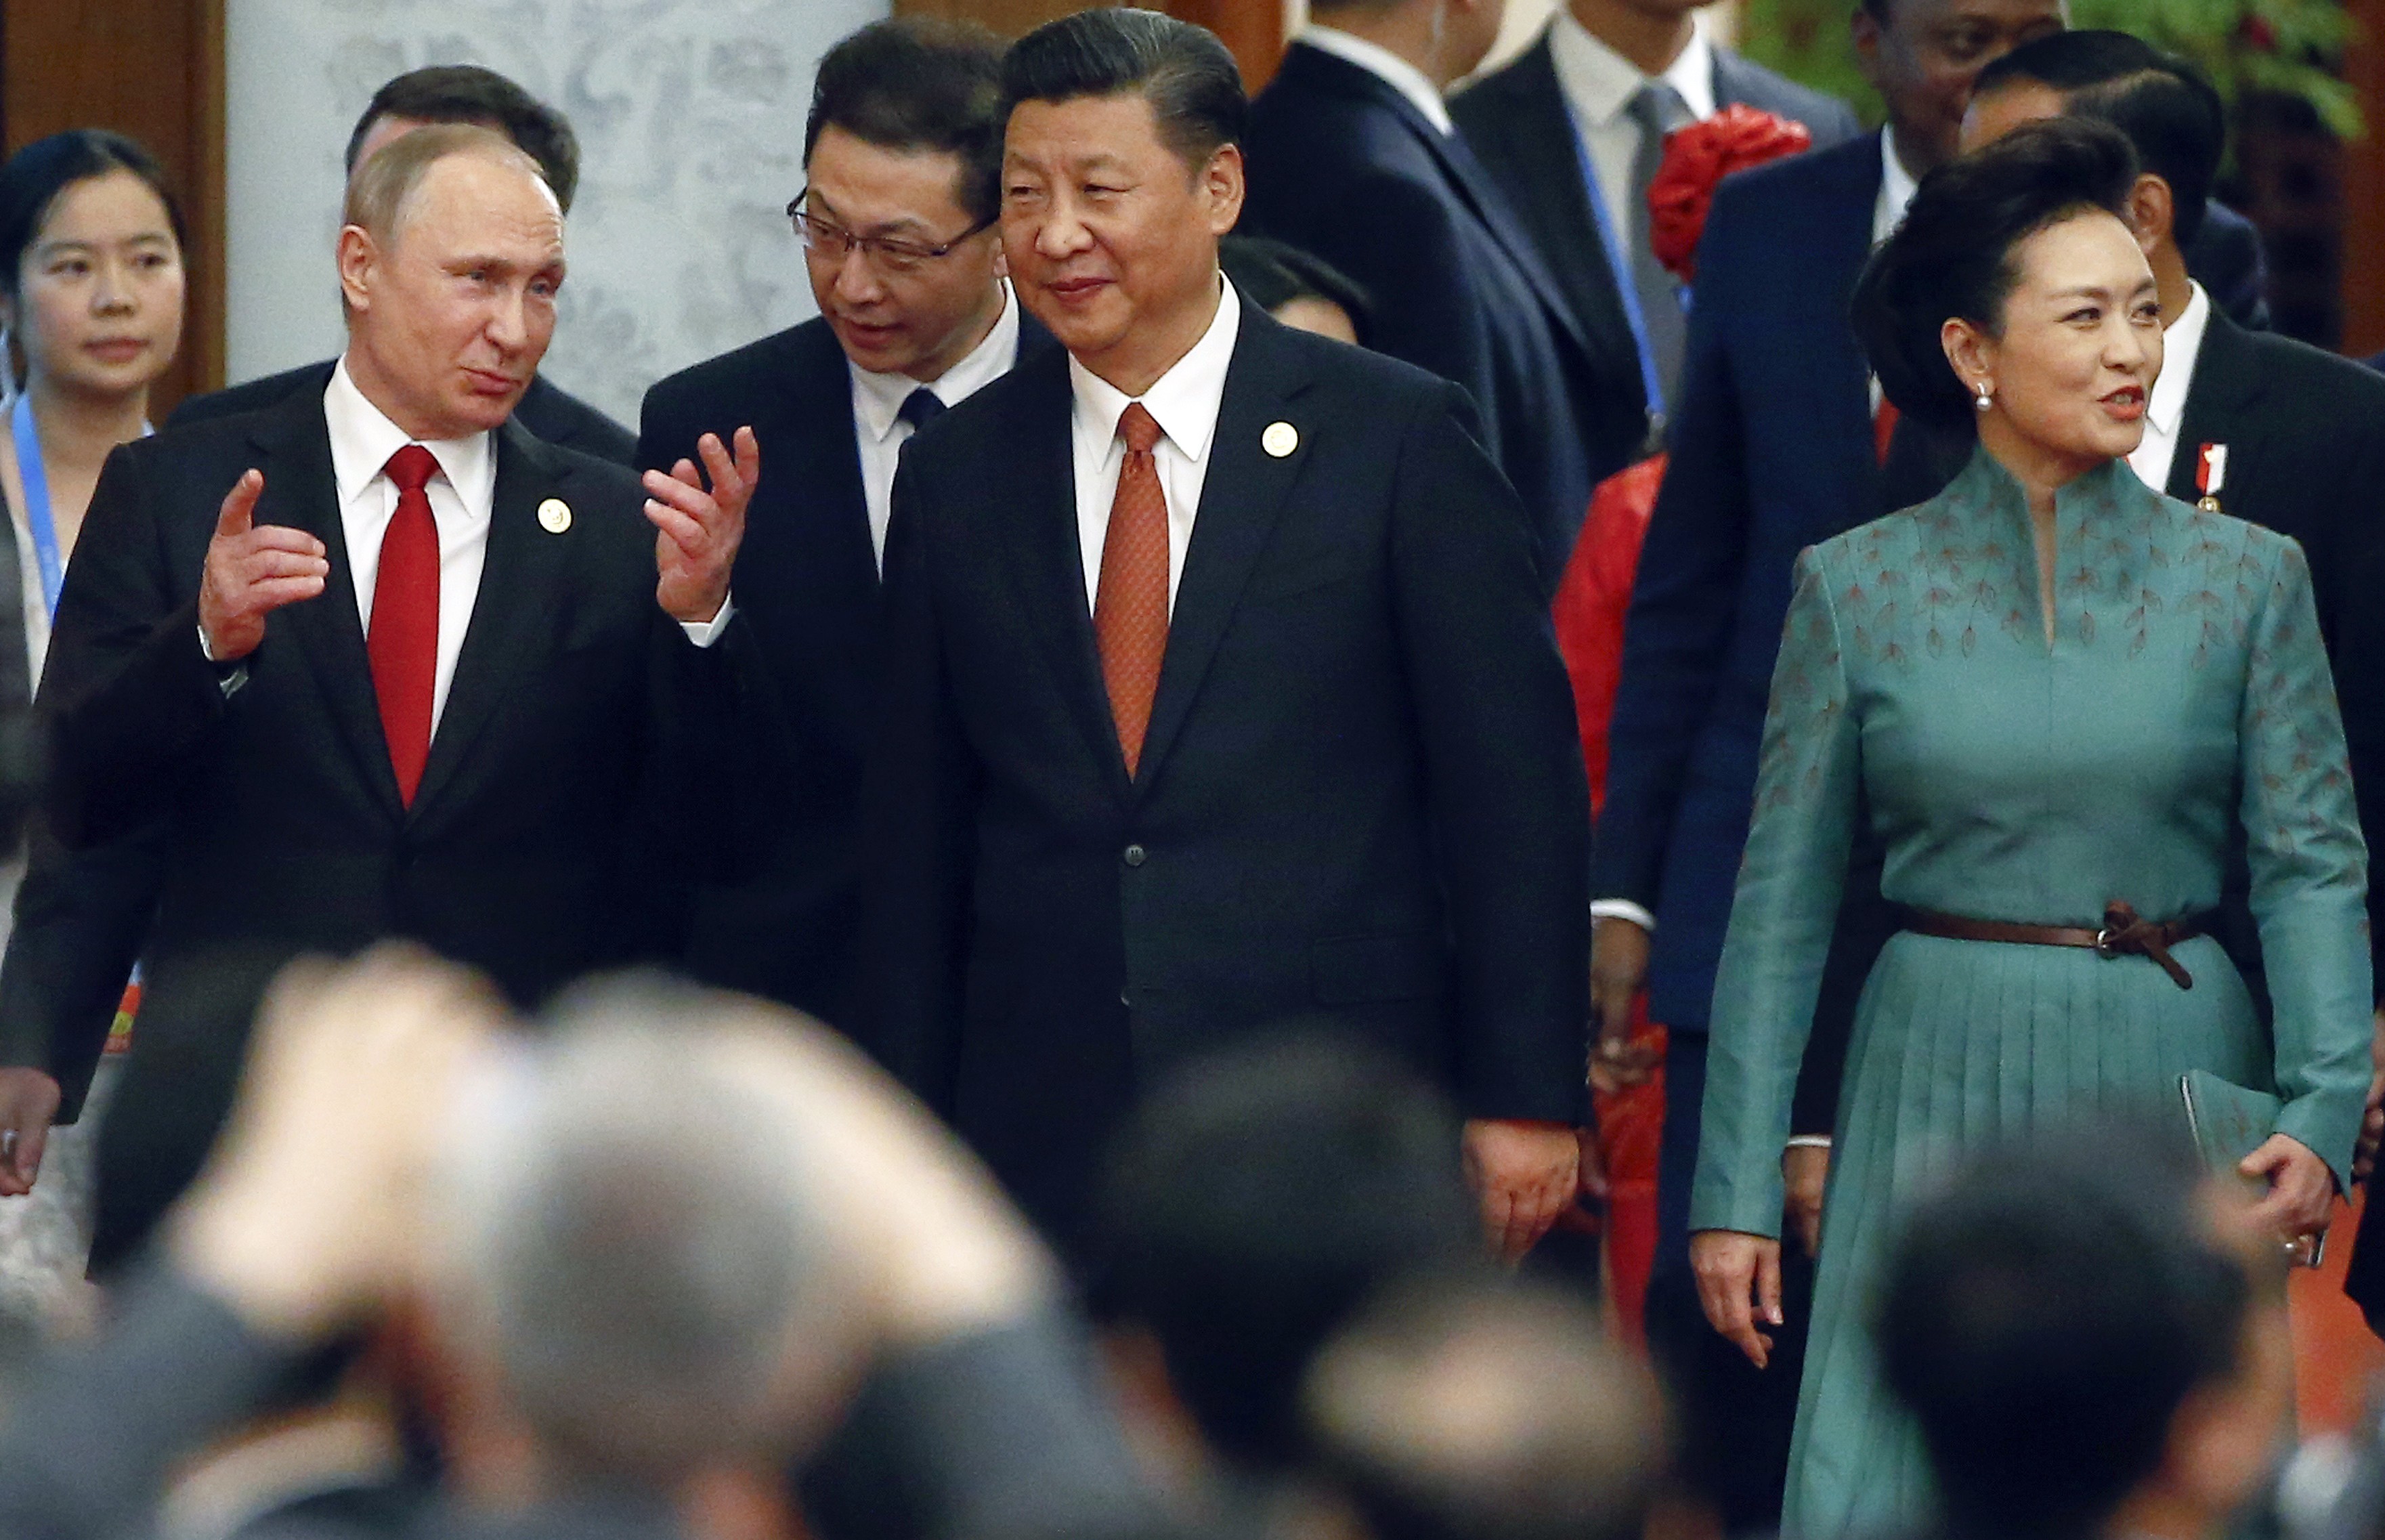 Chinese President Xi Jinping, centre, his wife Peng Liyuan and Russian President Vladimir Putin, left, arrive for a welcome banquet for the Belt and Road Forum at the Great Hall of the People in Beijing, Sunday, May 14, 2017. Photo: AP